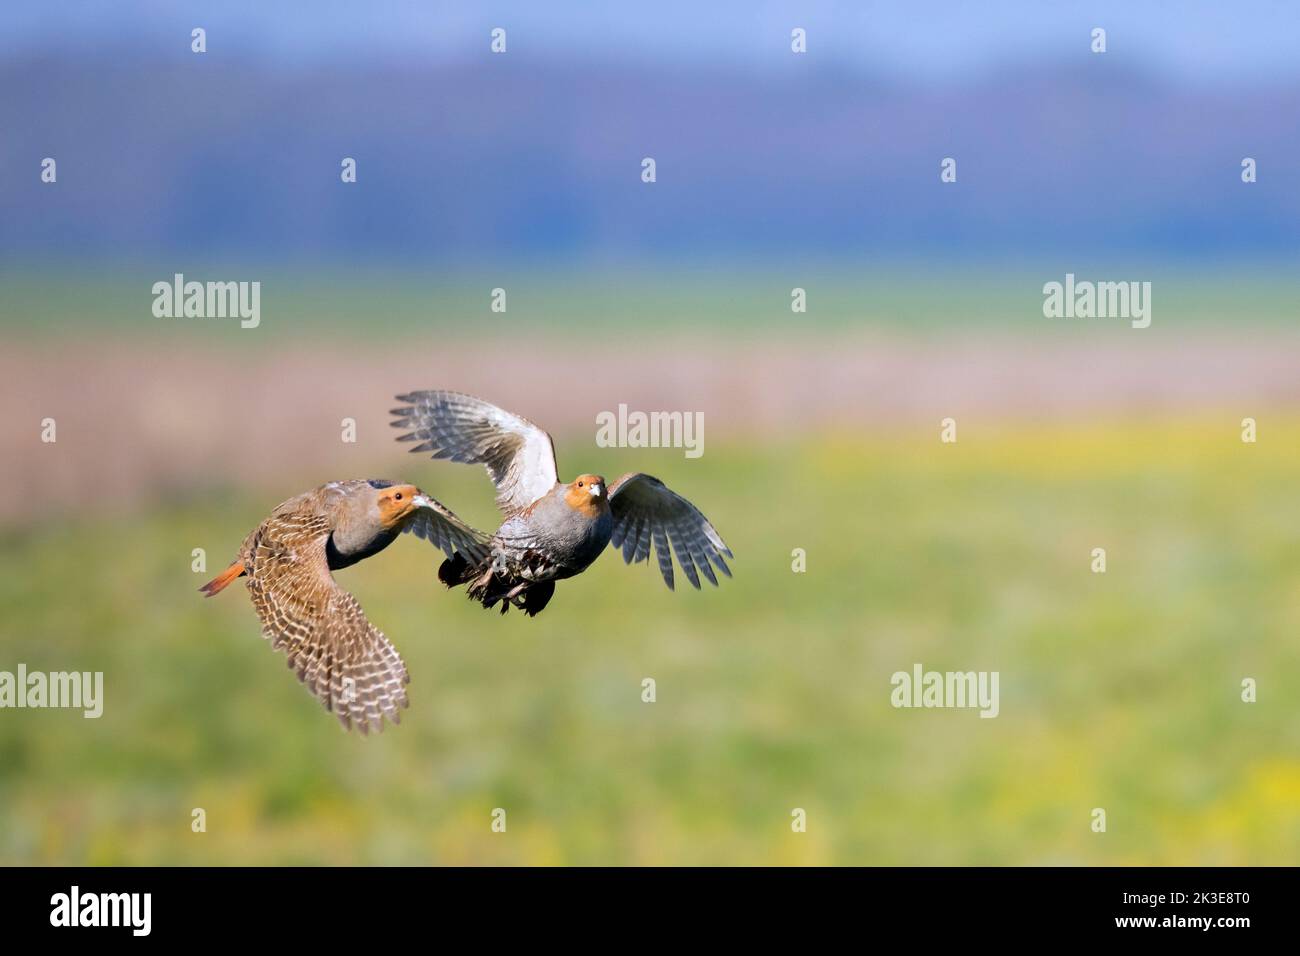 Two grey partridges / English partridges / huns (Perdix perdix) males flying over field in spring Stock Photo